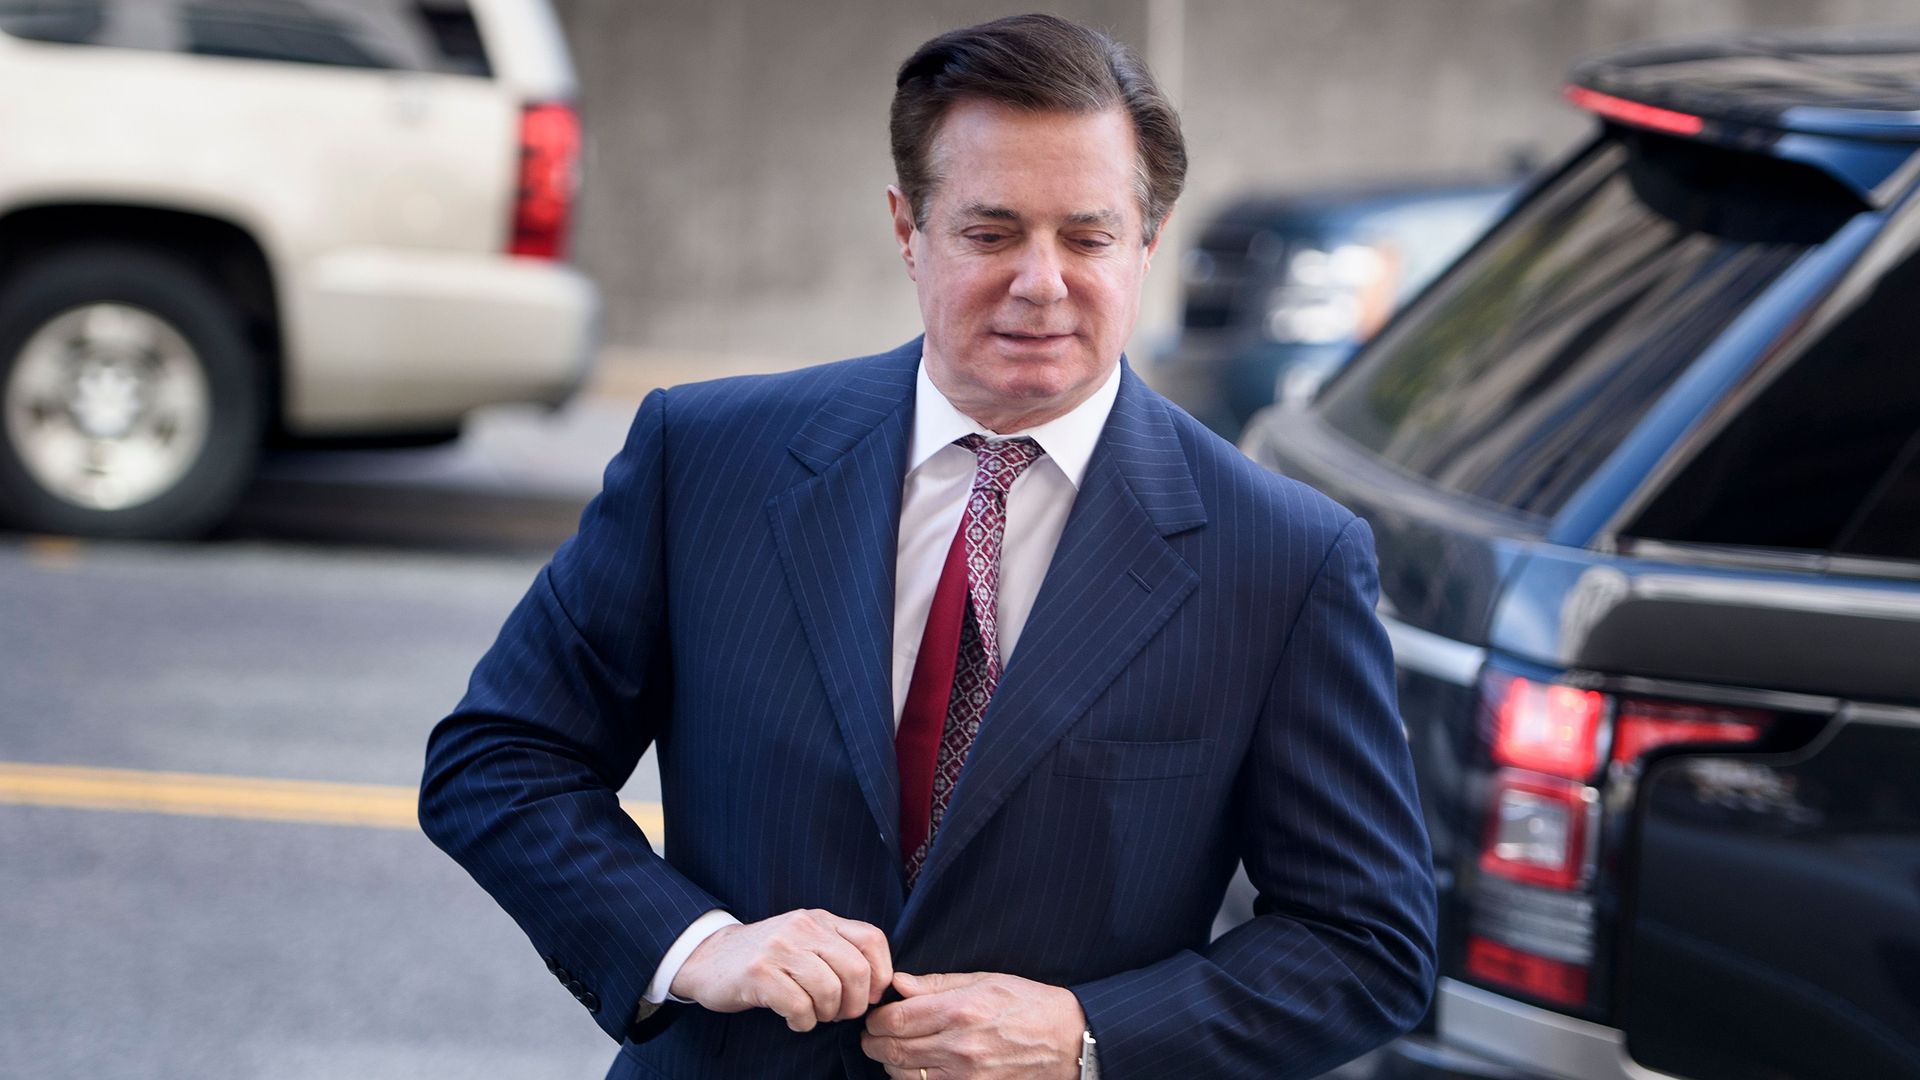 Paul Manafort buttons up his jacket as he walks toward the courthouse